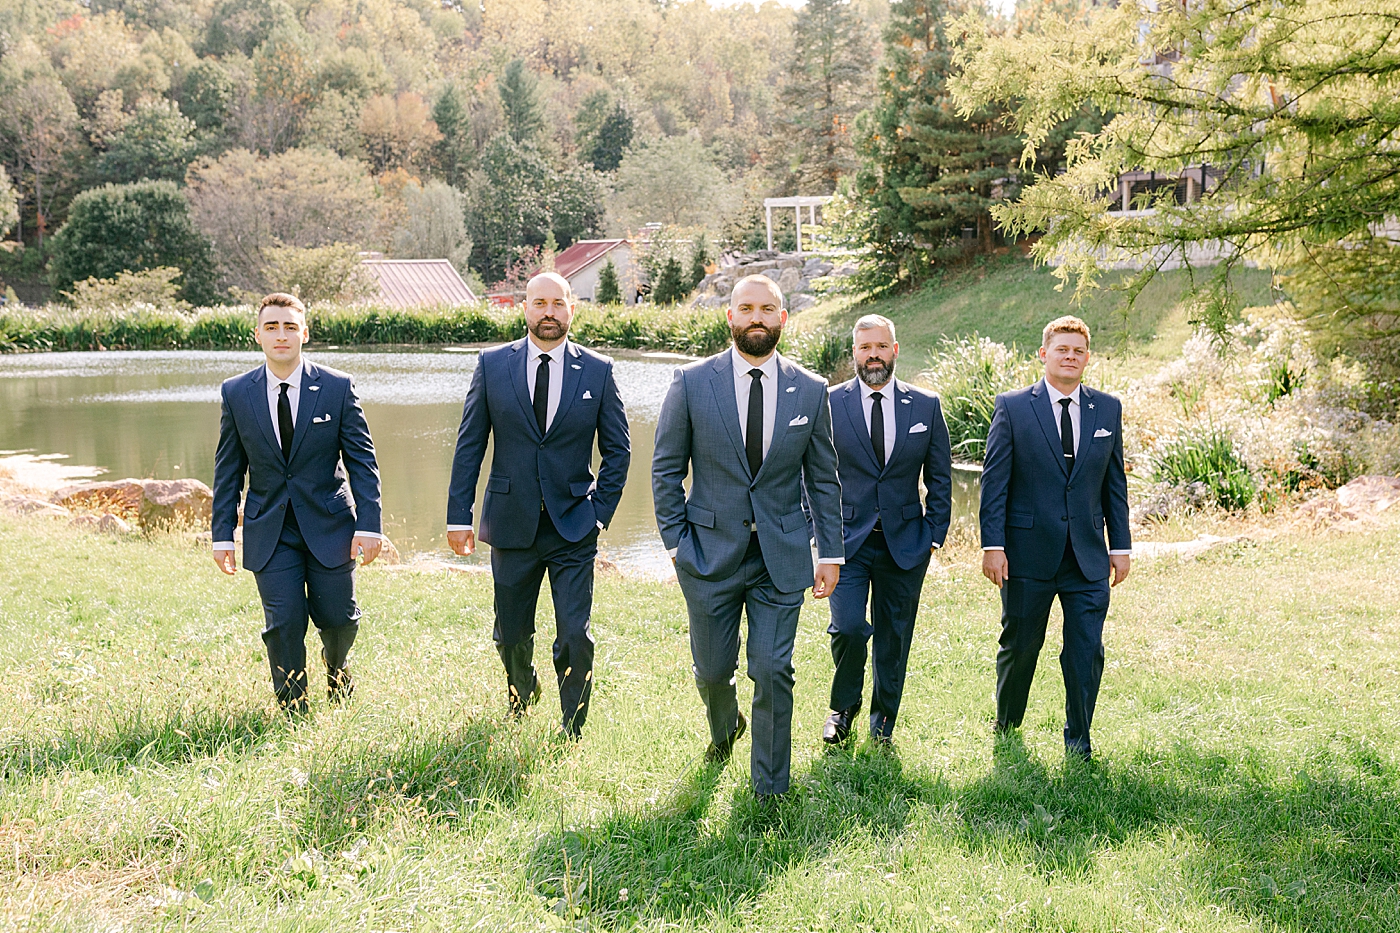 Groomsmen walking in tuxes | Photo by Hope Helmuth Photography